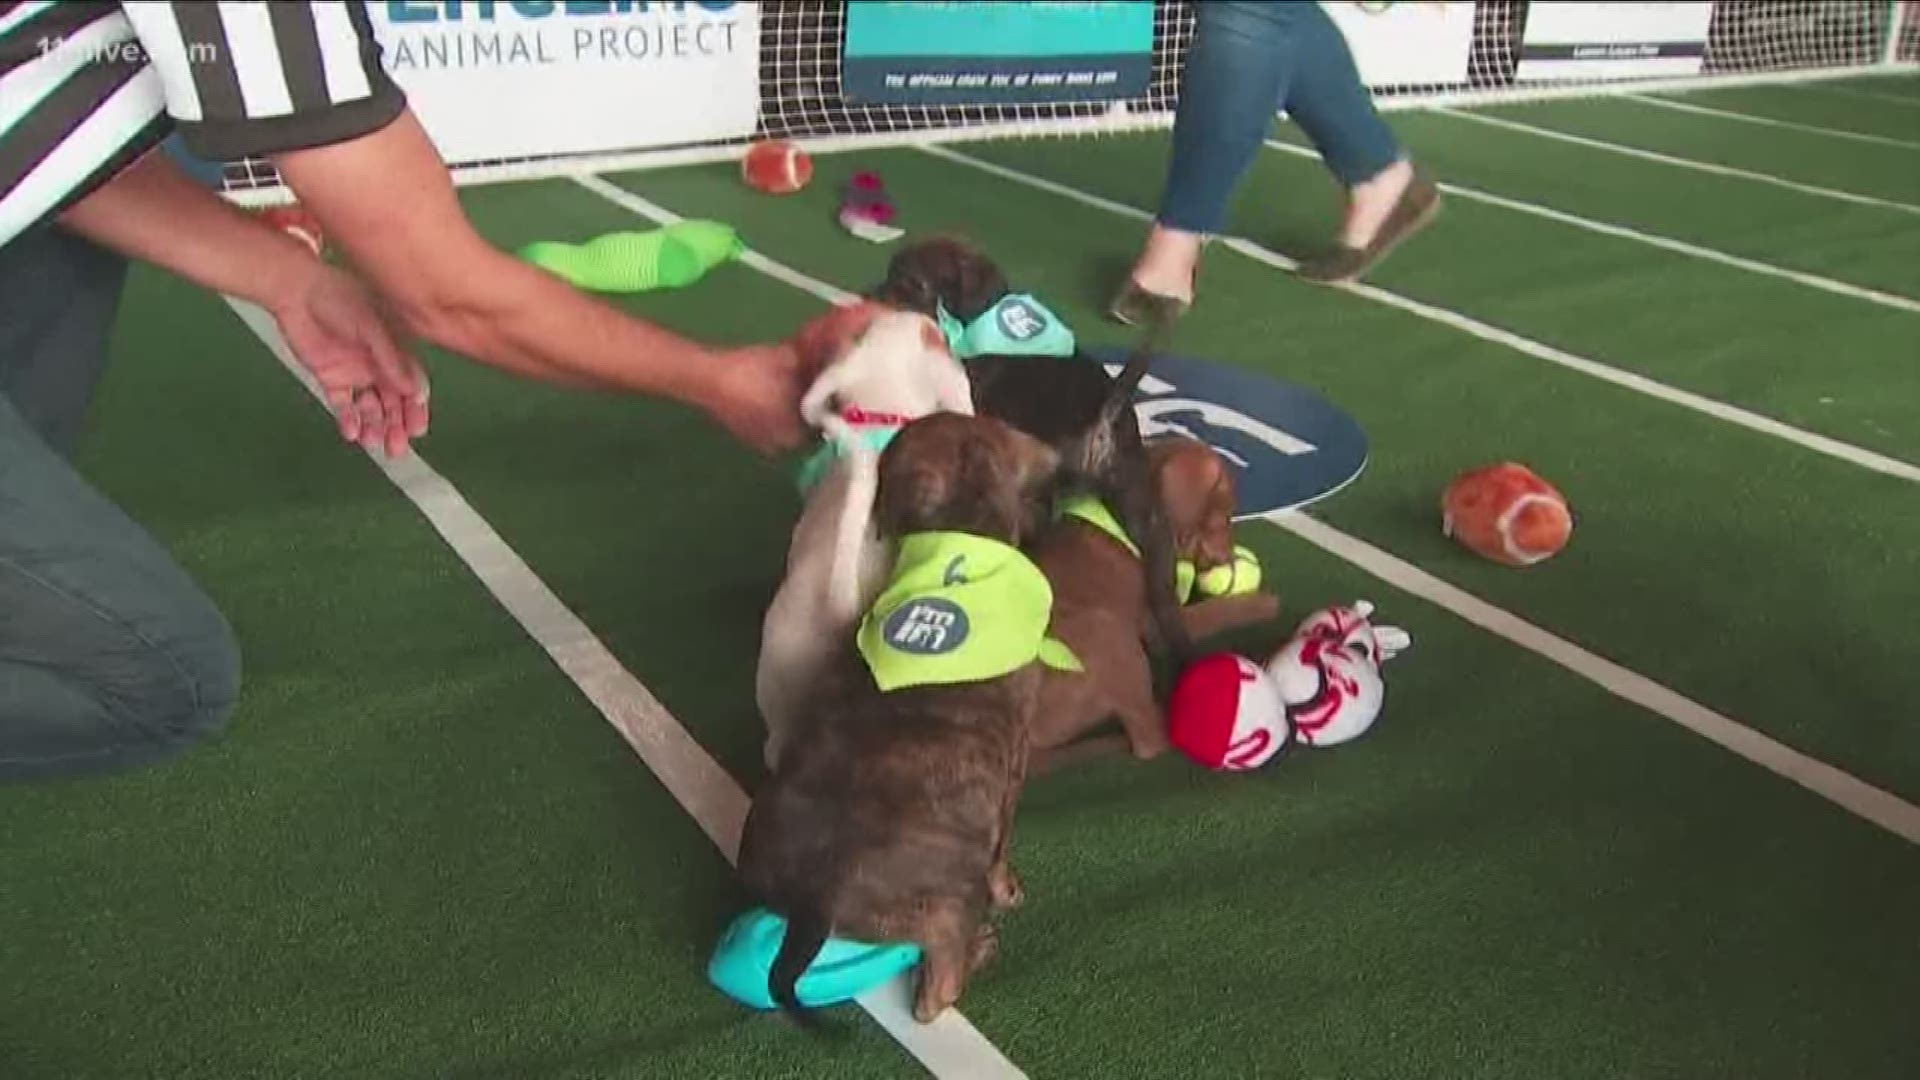 First Ever Service Brewing Puppy Bowl !!!! - Service Brewing Co.